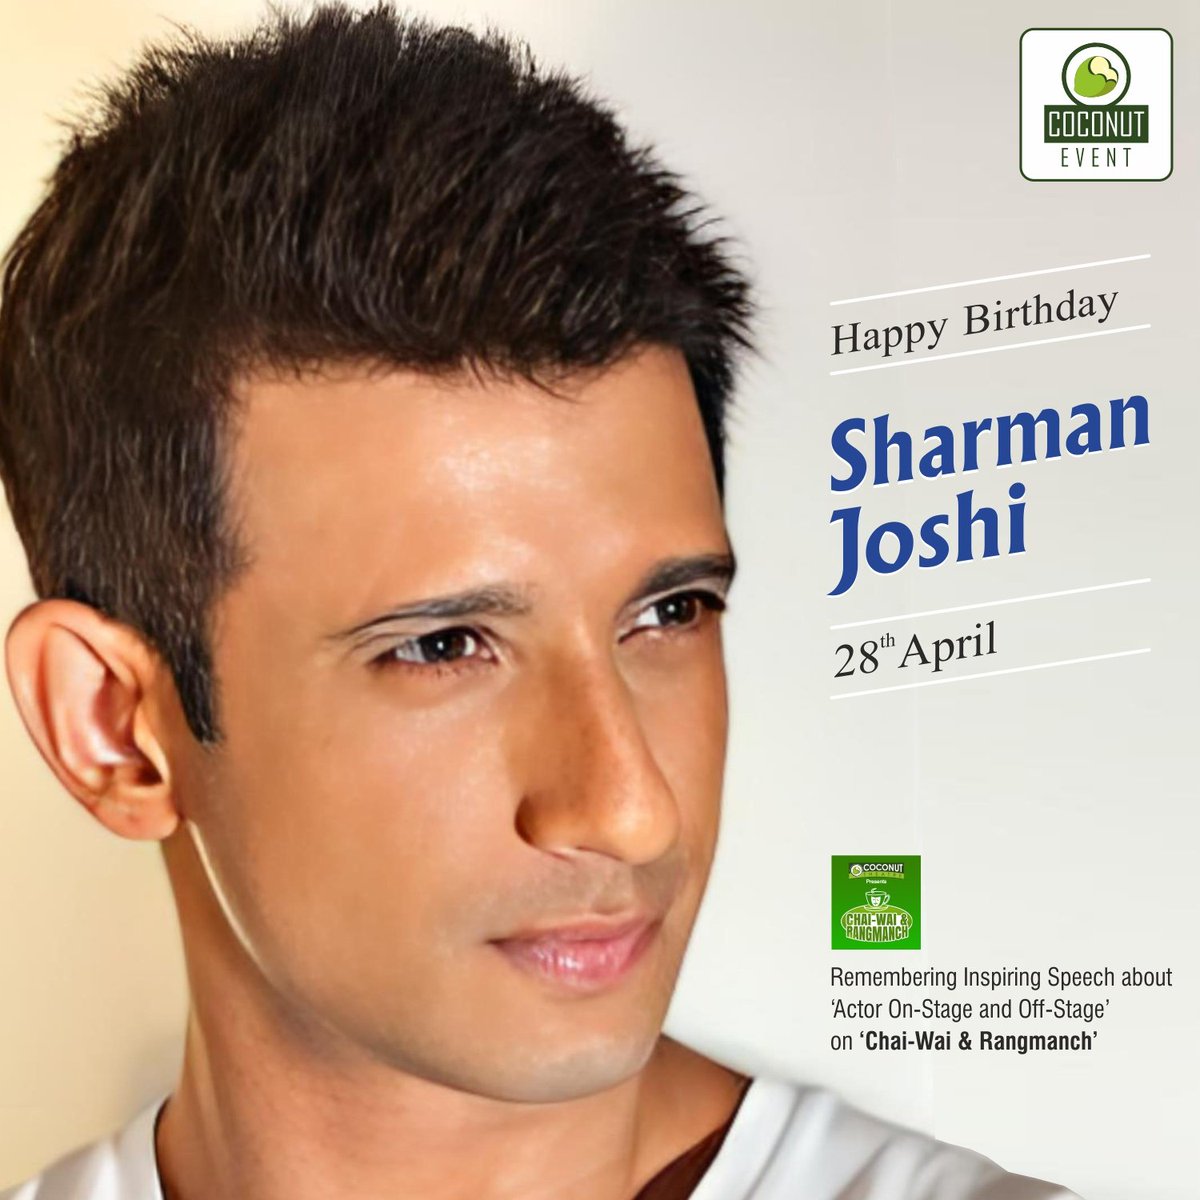 Wishing #SharmanJoshi a very #HappyBirthday from #CoconutEvent & #CoconutTheatre

Your acting skills & comical timing set a benchmark for new actors. 

May this year bring happiness & good health! 

#ChaiWaiAndRangmanch #RashminMajithia  #BirthdayWishes